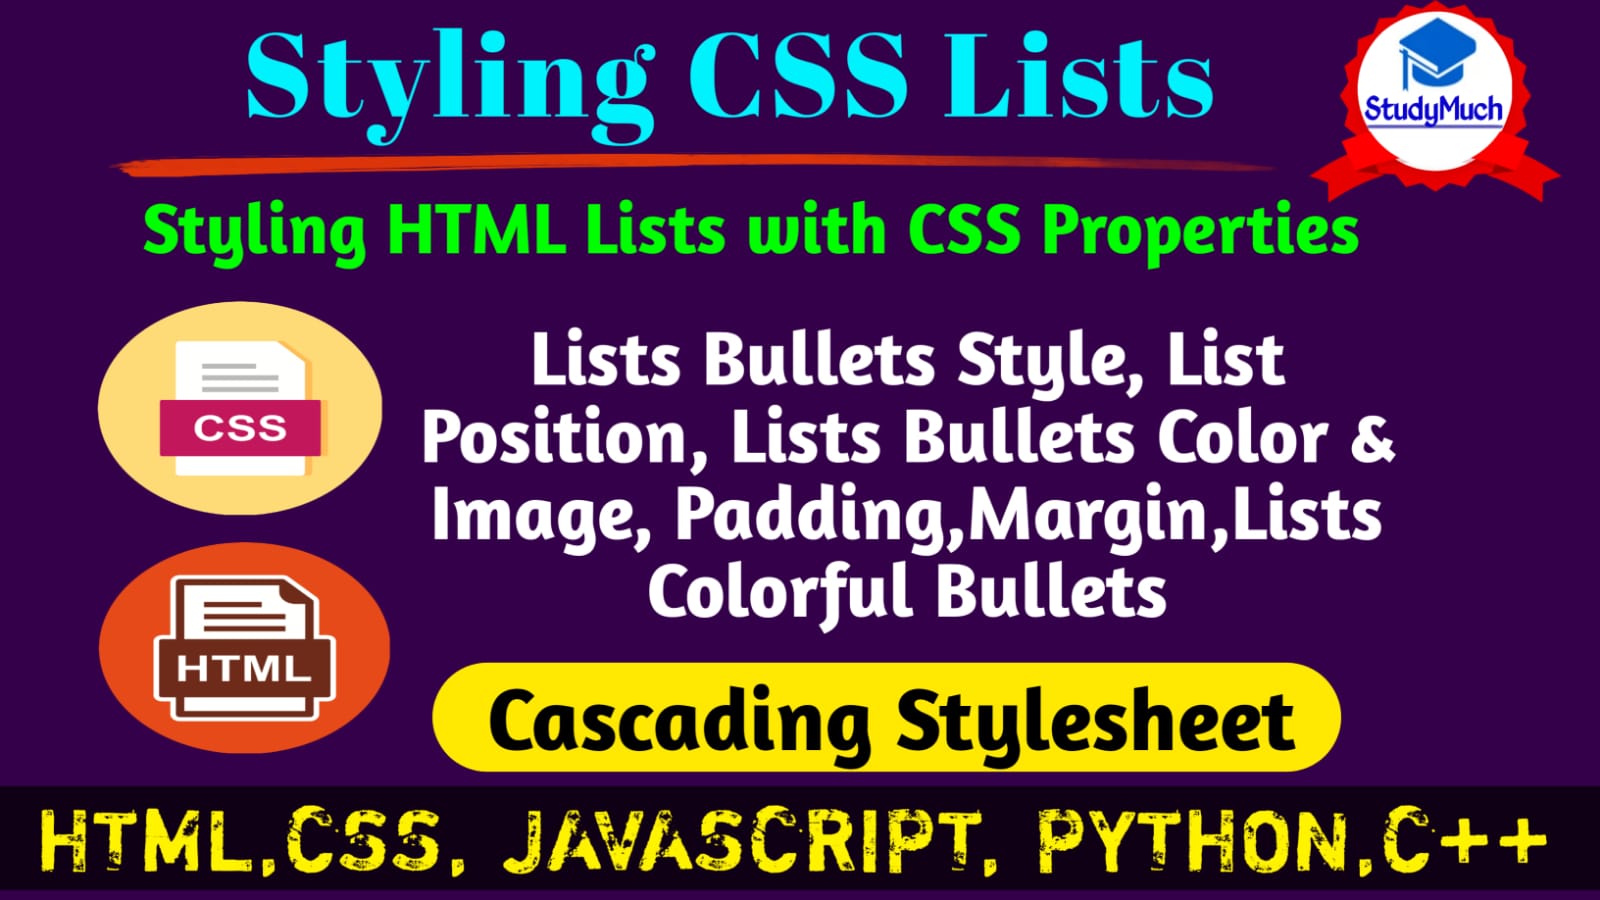 StudyMuch CSS Lists